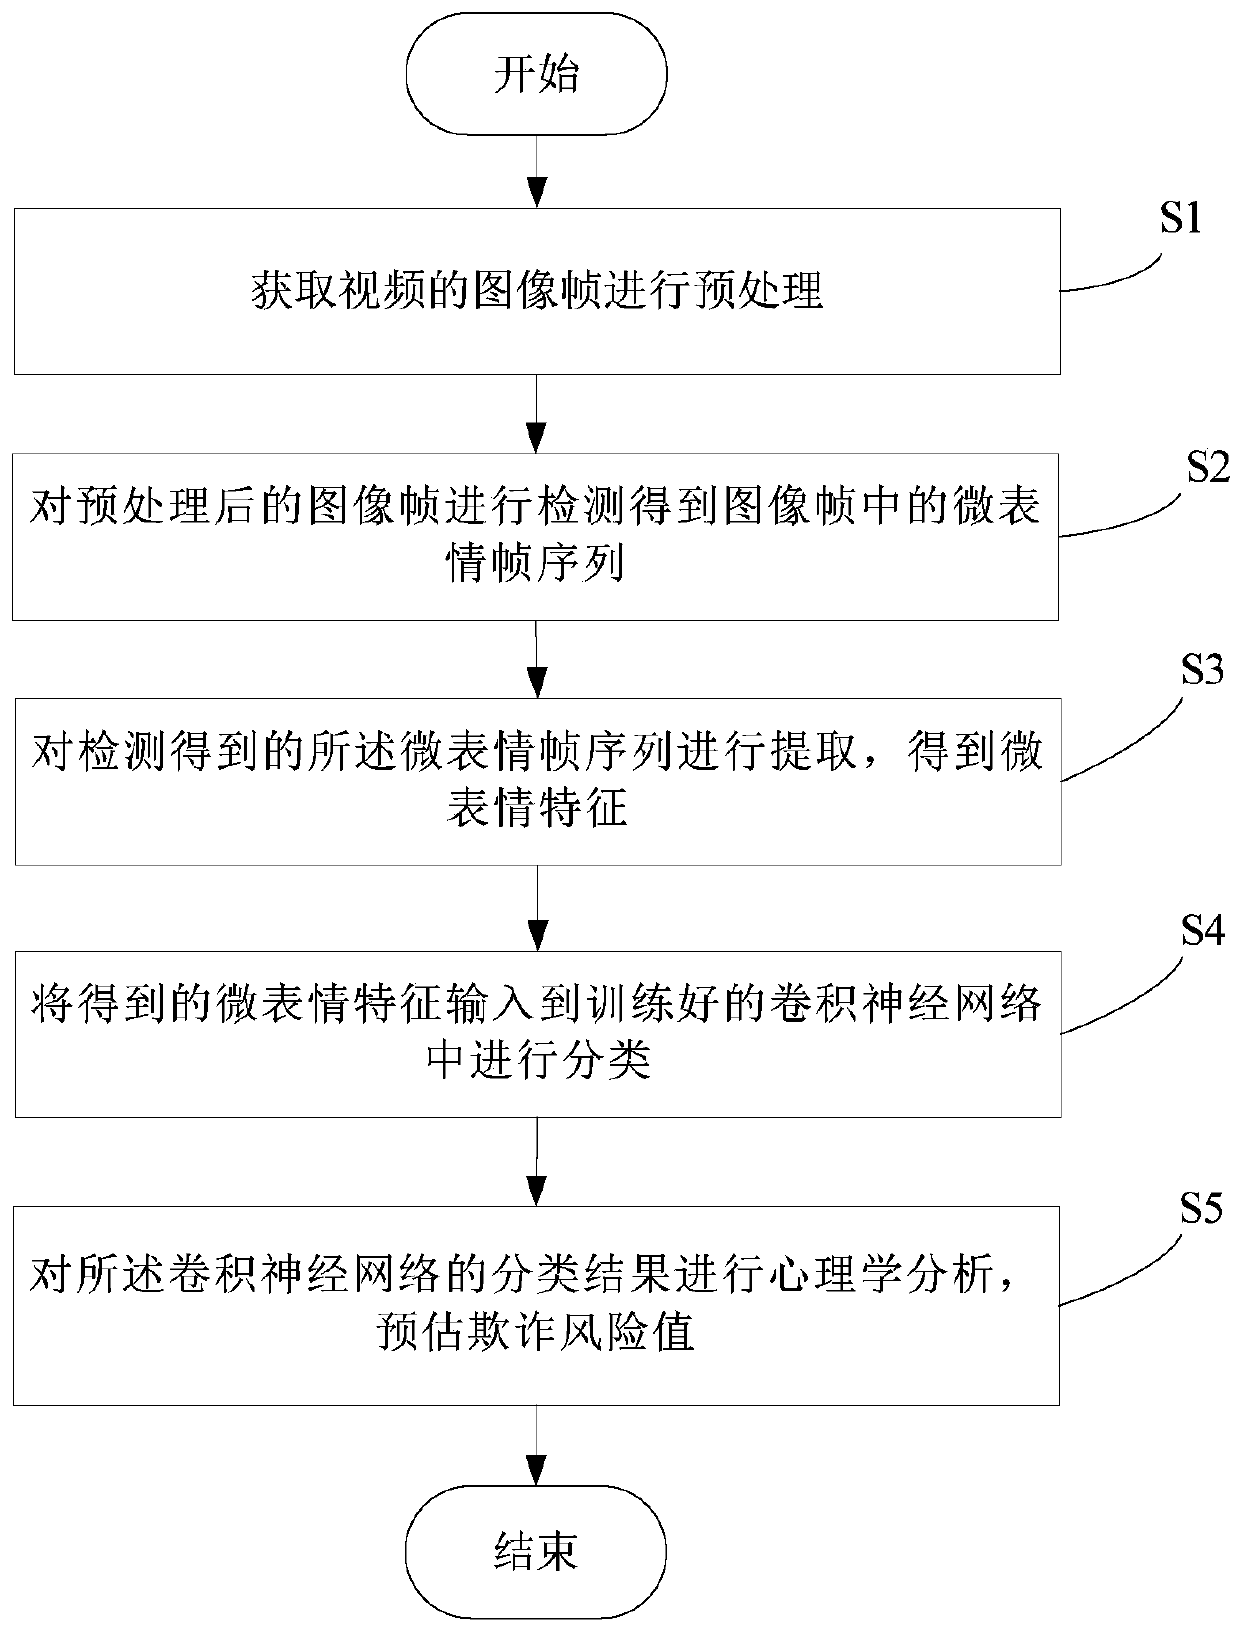 Micro-expression recognition financial risk control method and system